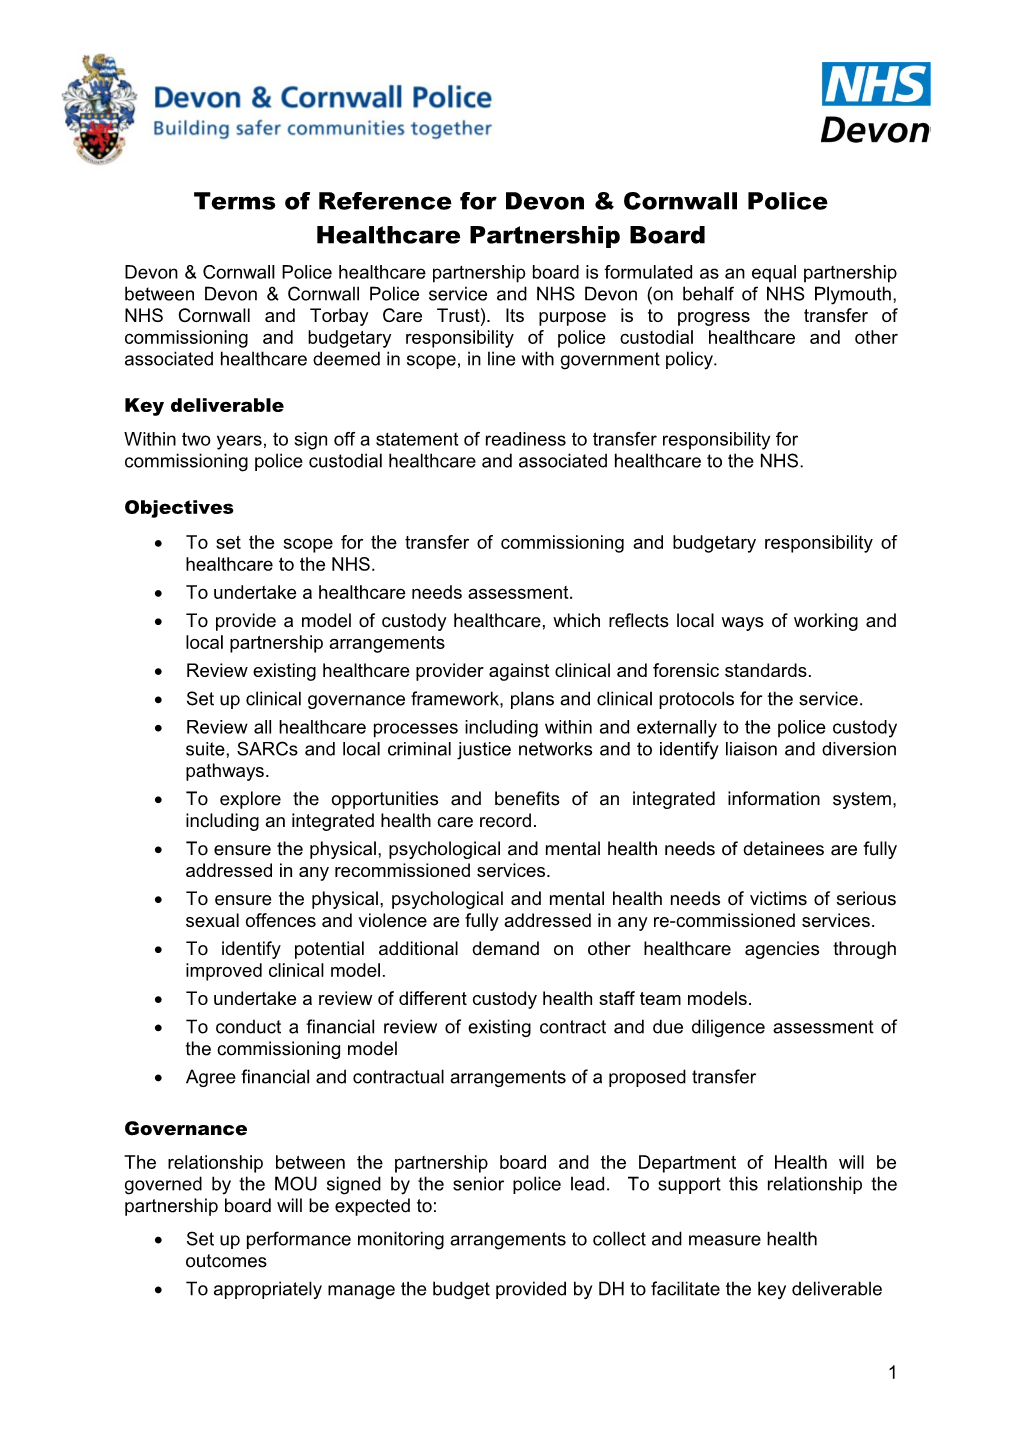 Terms of Reference for Devon & Cornwall Police Healthcare Partnership Board